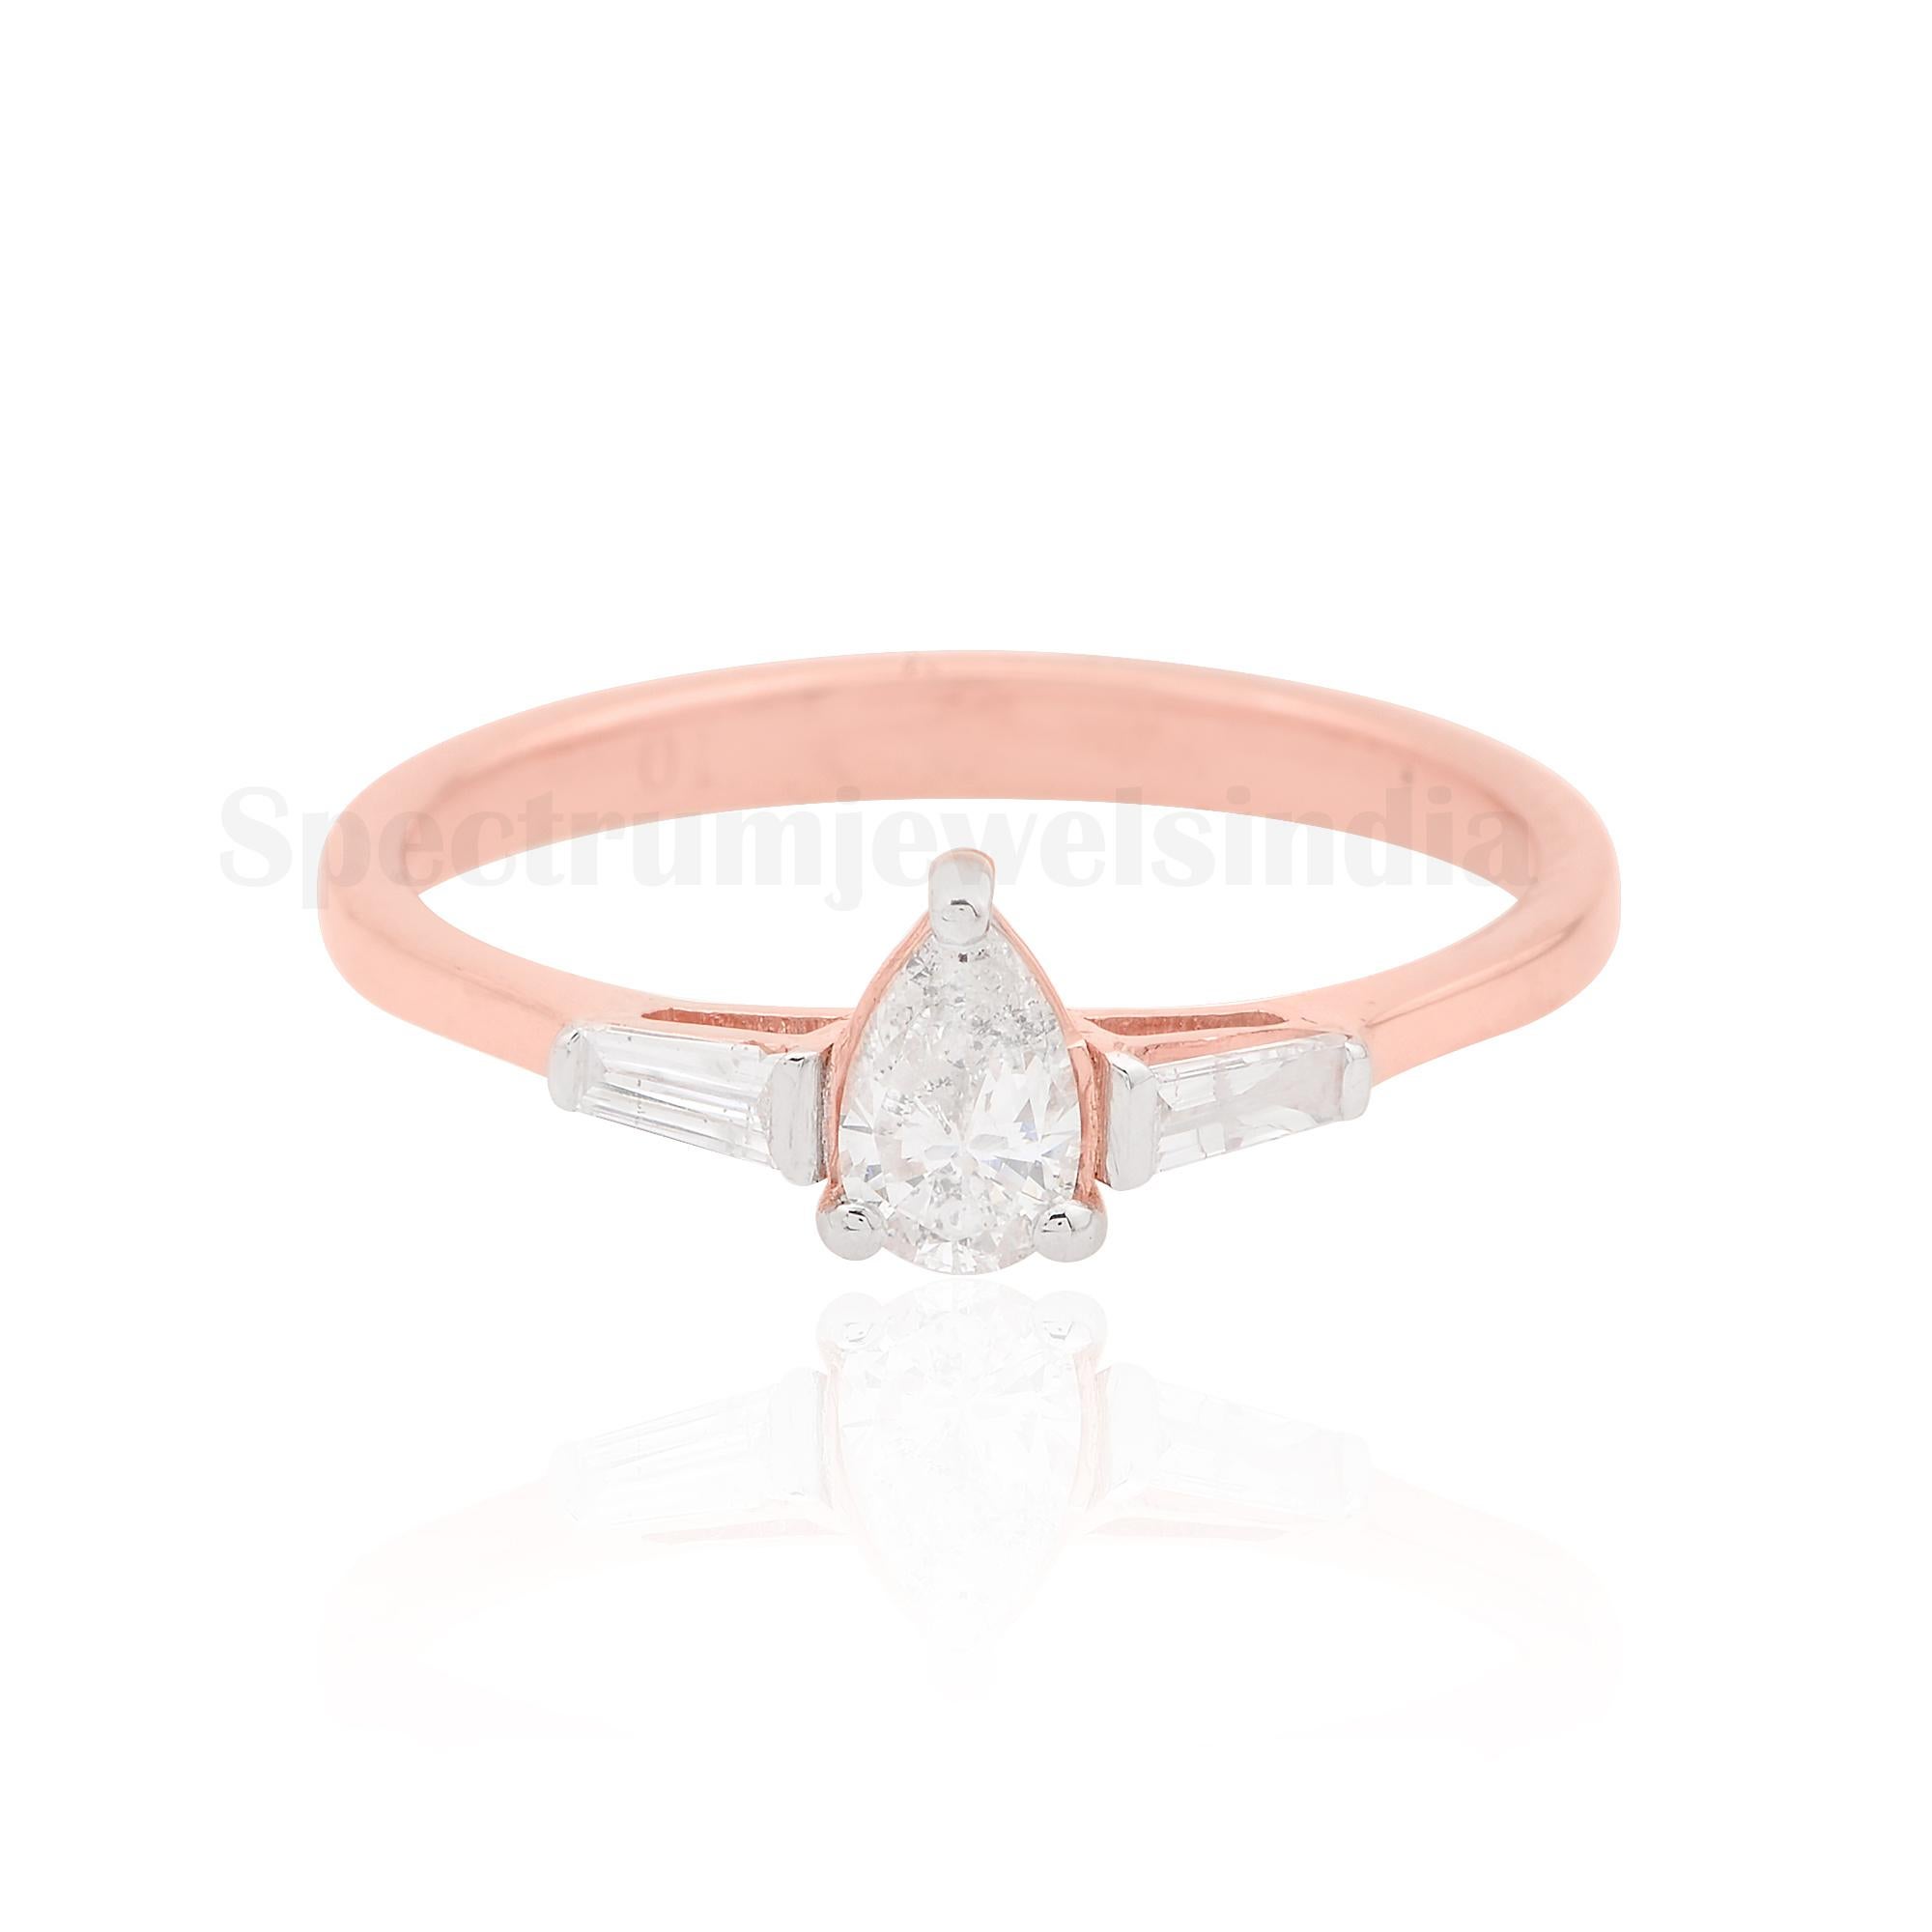 For Sale:  0.48 Carat Pear Baguette Diamond Band Ring Solid 18k Rose Gold Handmade Jewelry 2